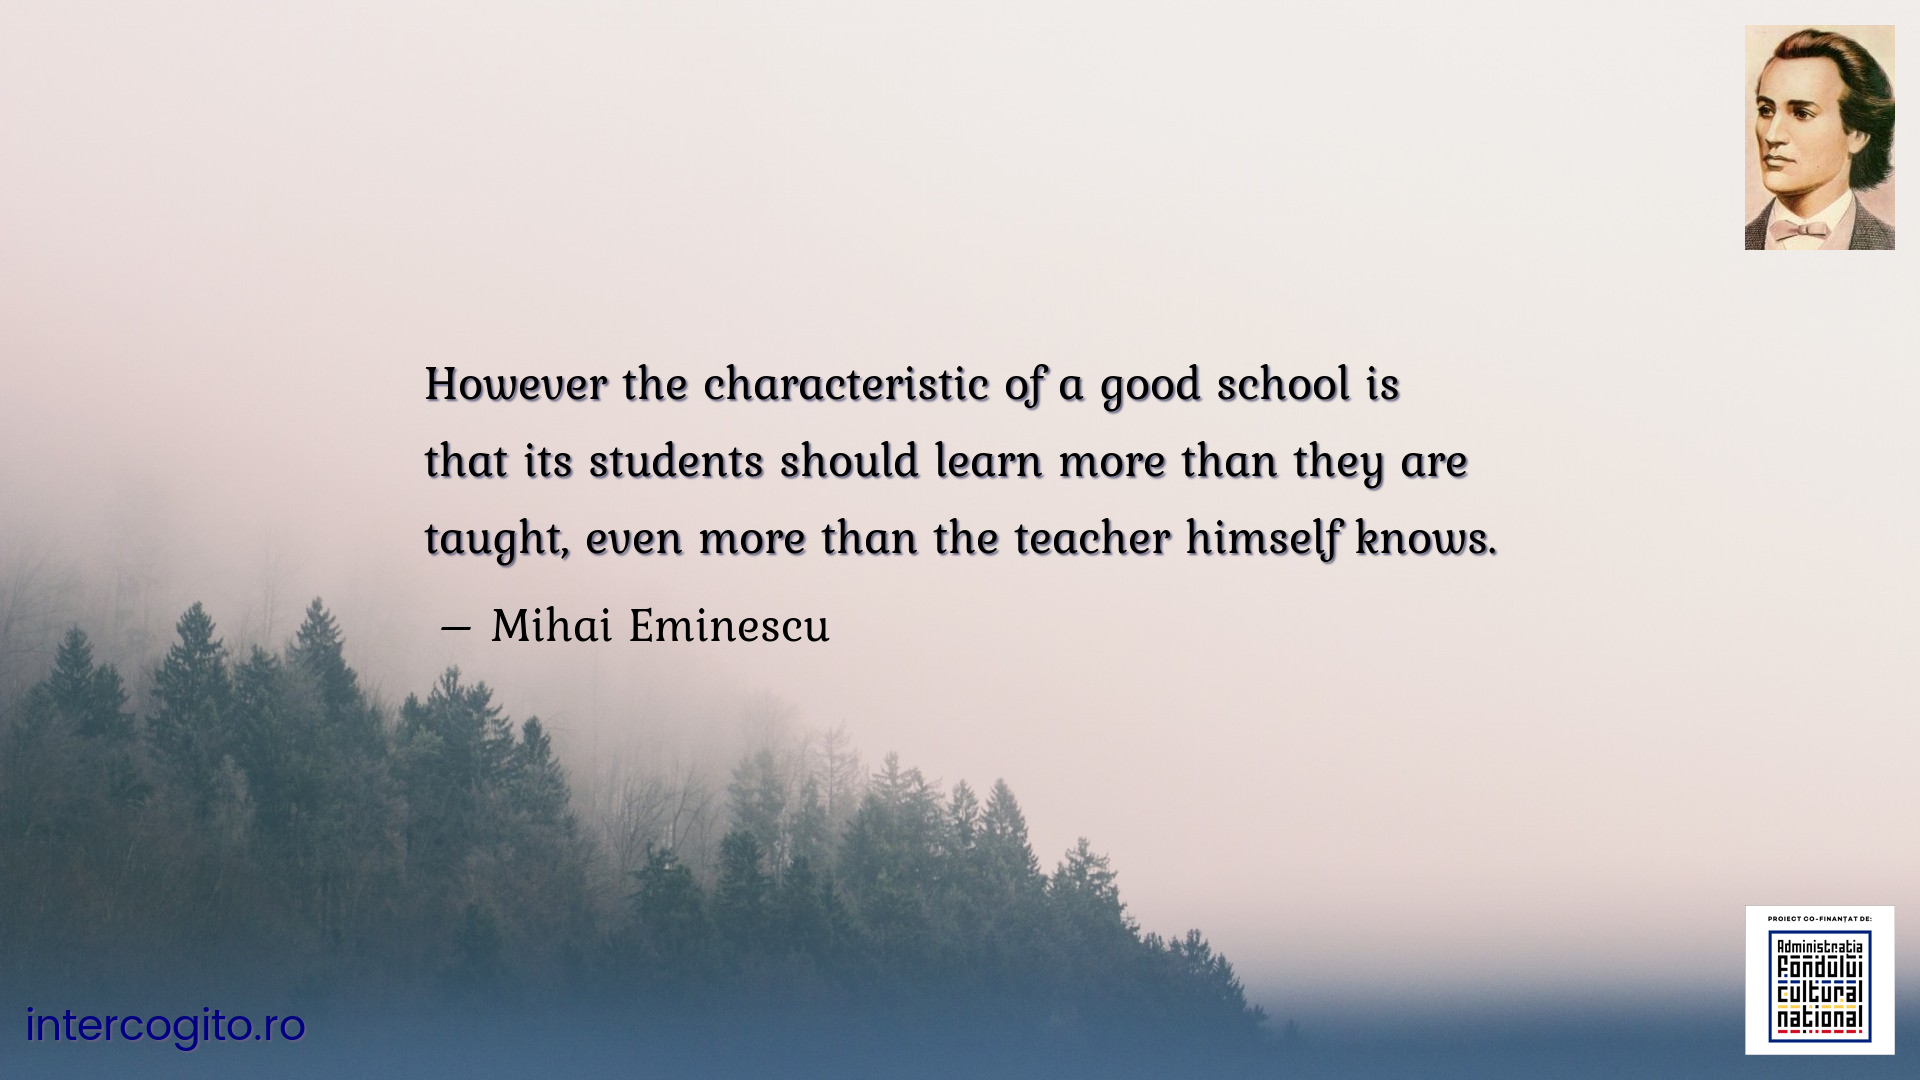 However the characteristic of a good school is that its students should learn more than they are taught, even more than the teacher himself knows.